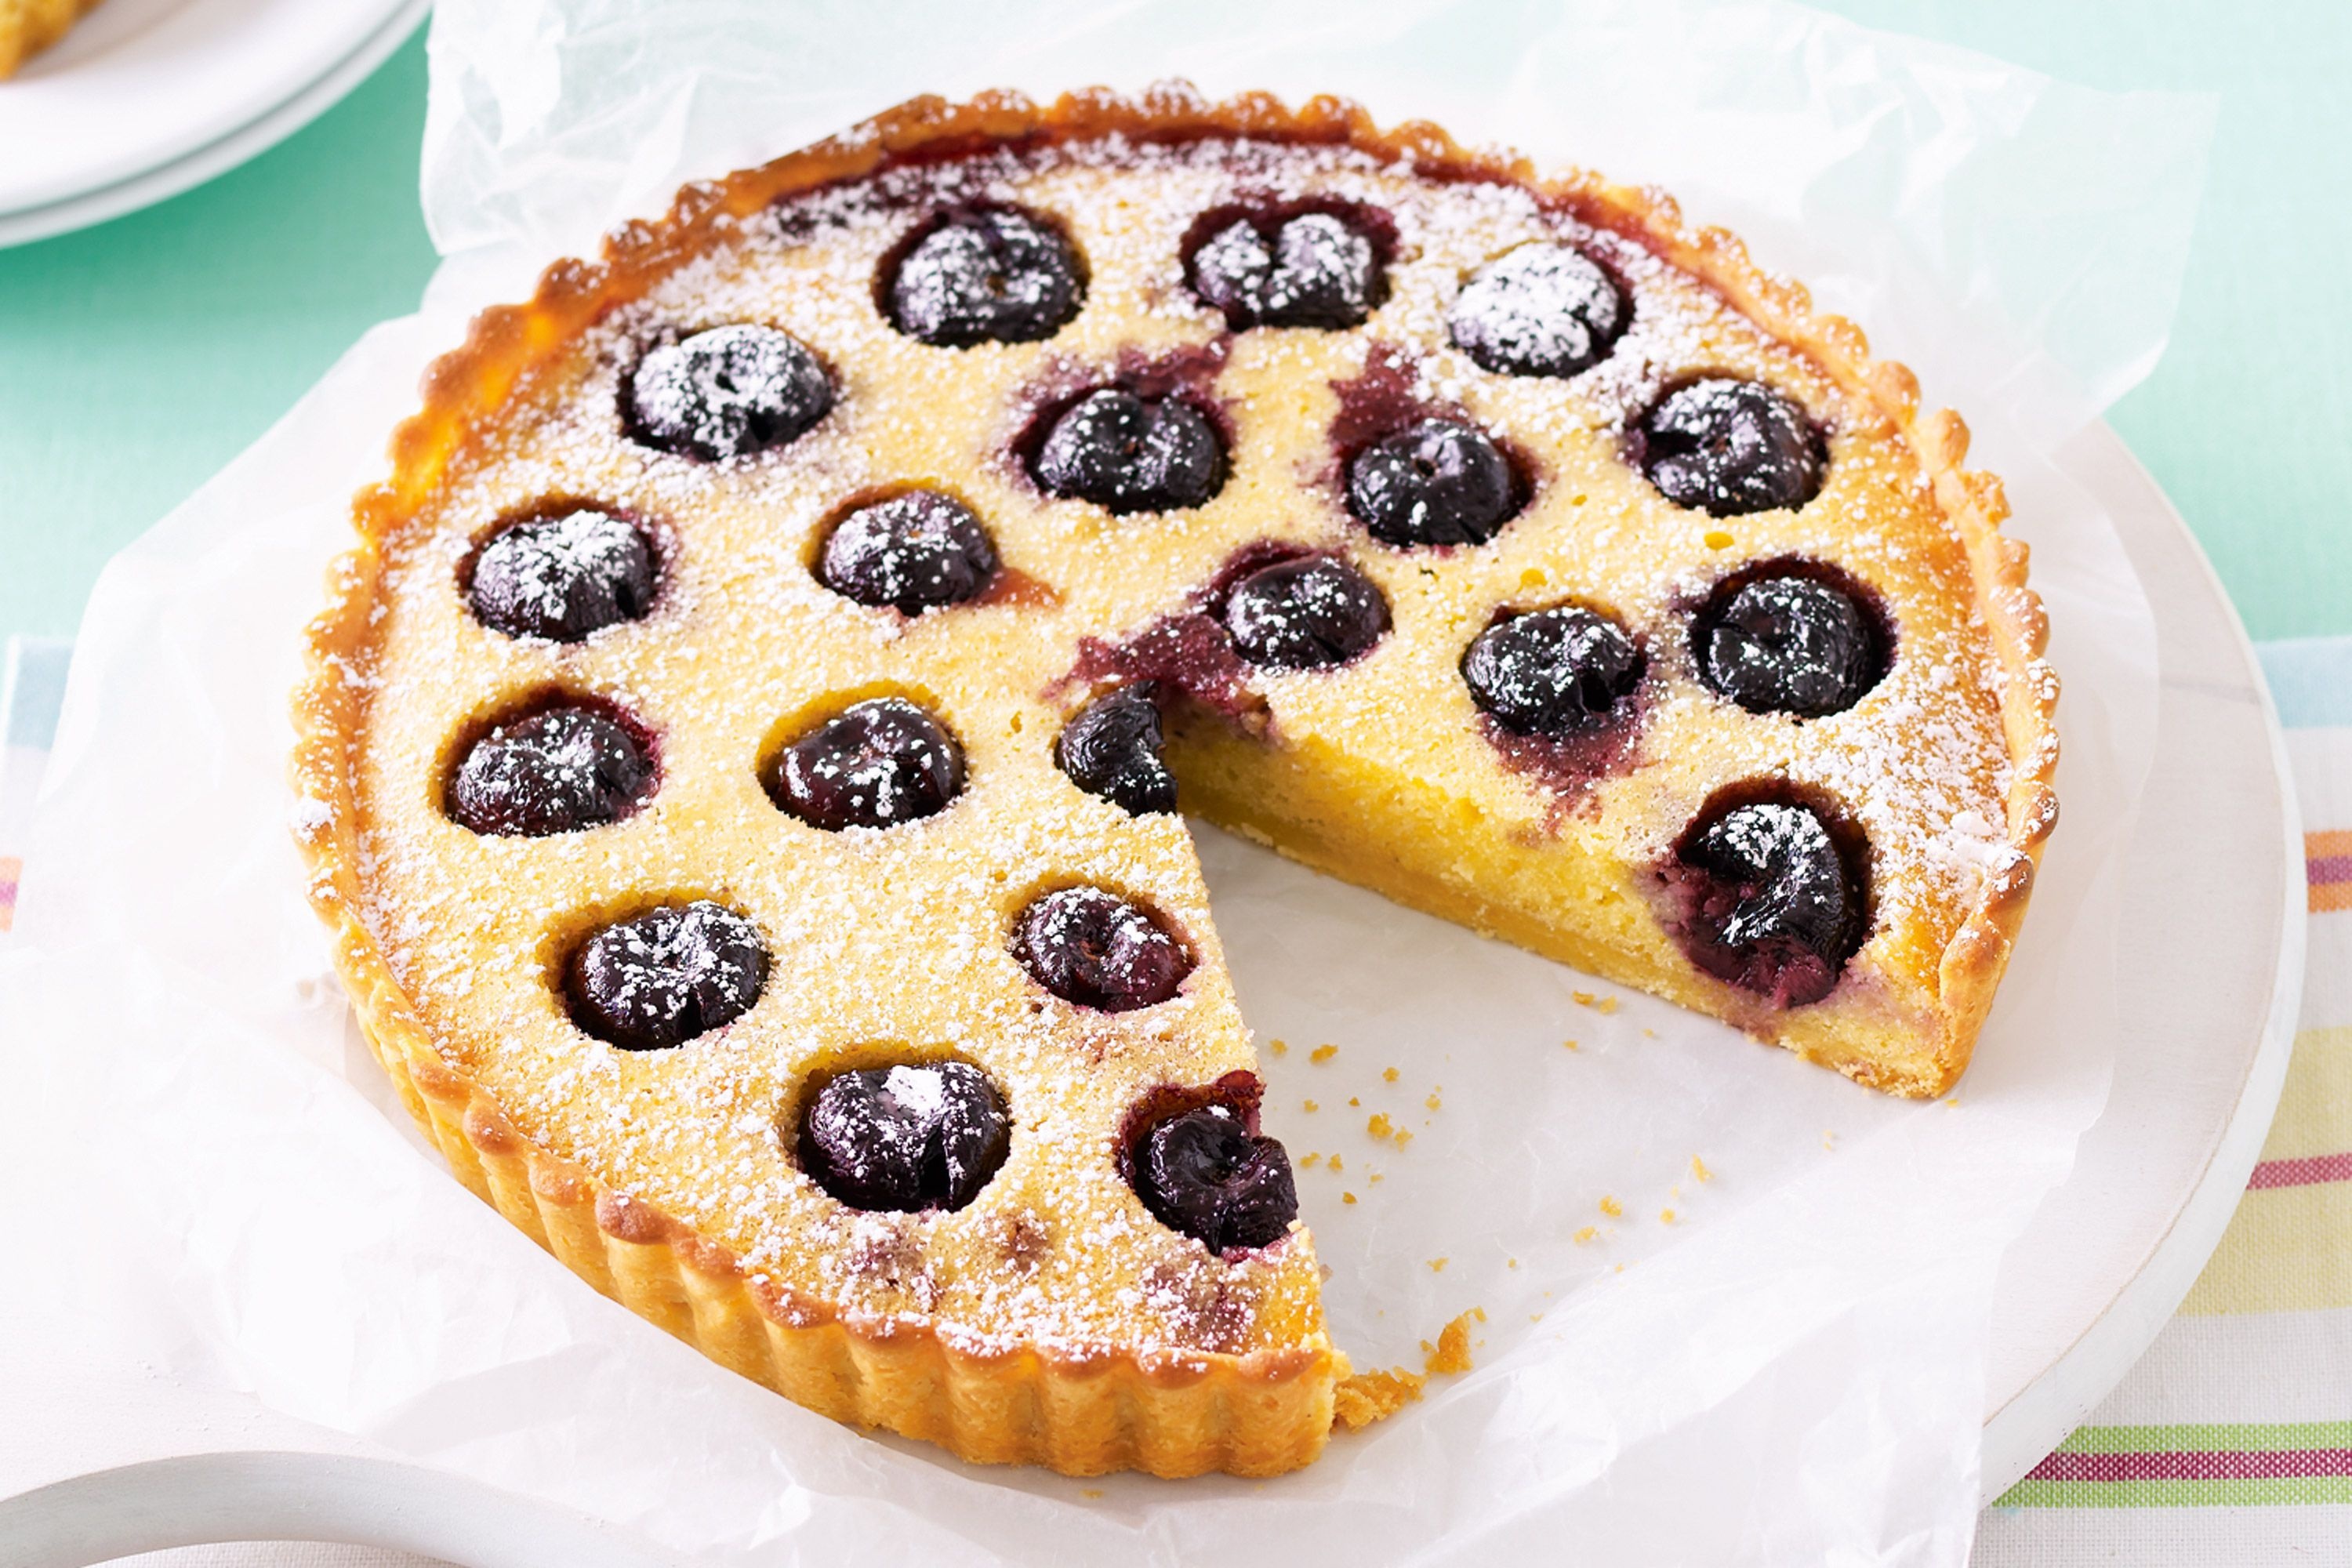 Tart: A shortcrust pastry, The filling may be sweet or savory. 3000x2000 HD Wallpaper.